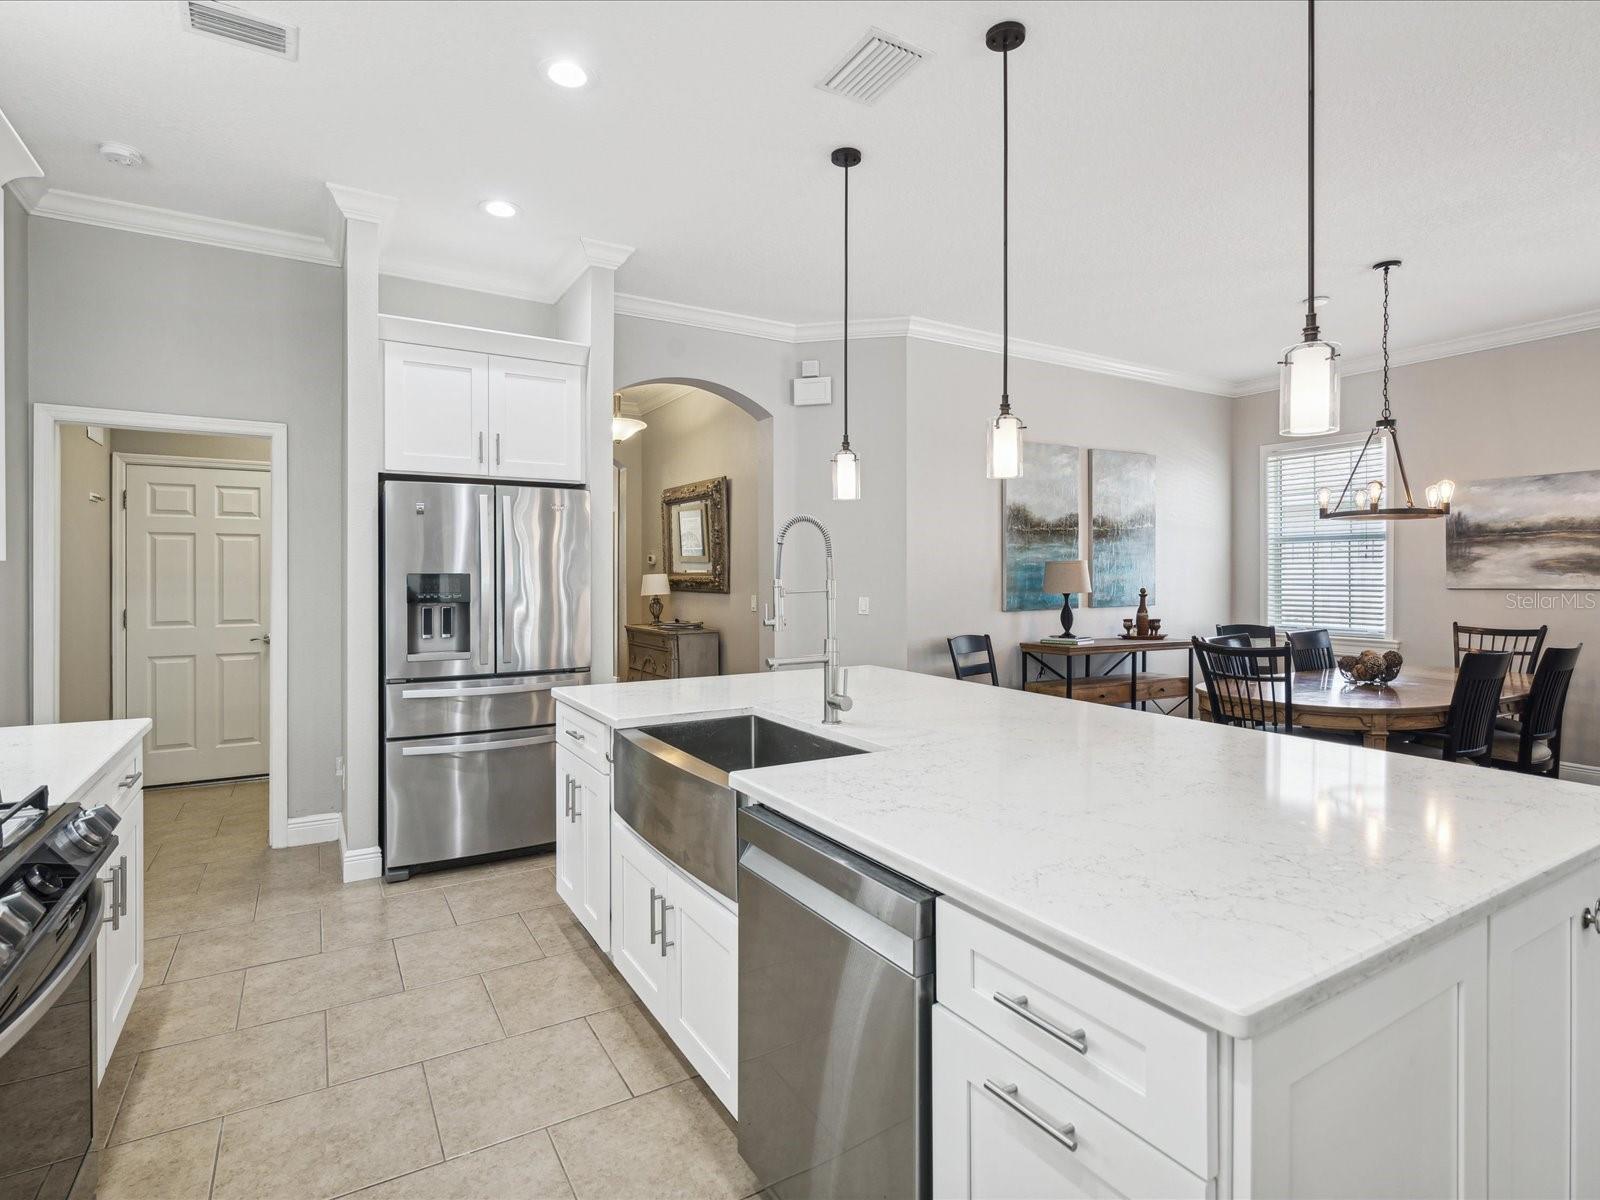 Stainless steel appliances complement the kitchen and add a modern flair to this cottage design.